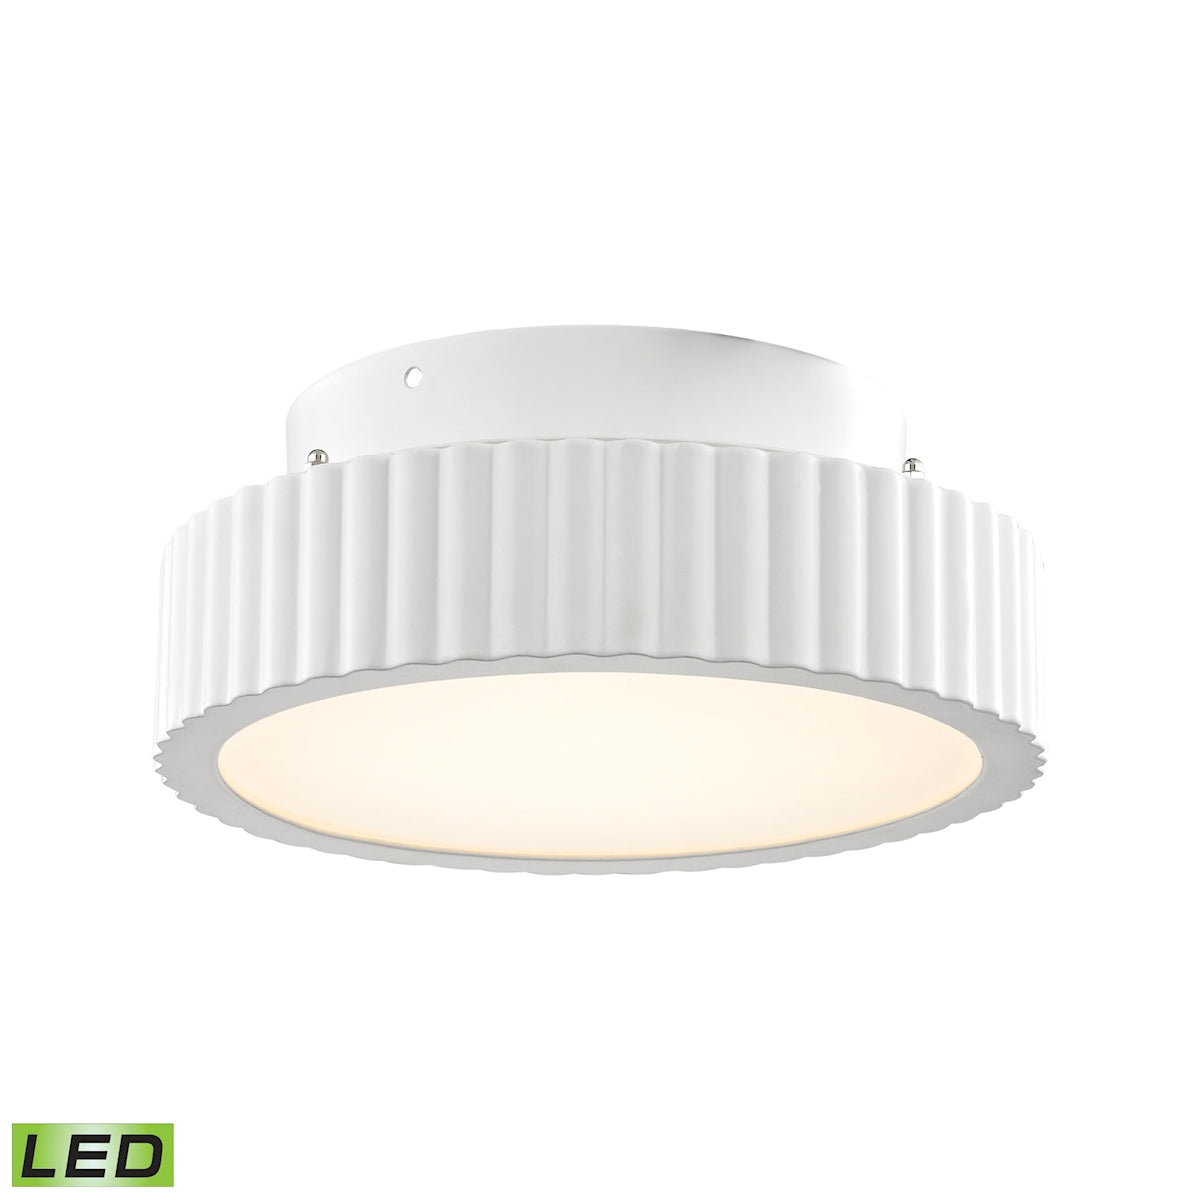 ELK Lighting FML600-10-30 Digby 50-Light Flush Mount in Matte White with Opal White Glass Diffuser - Integrated LED